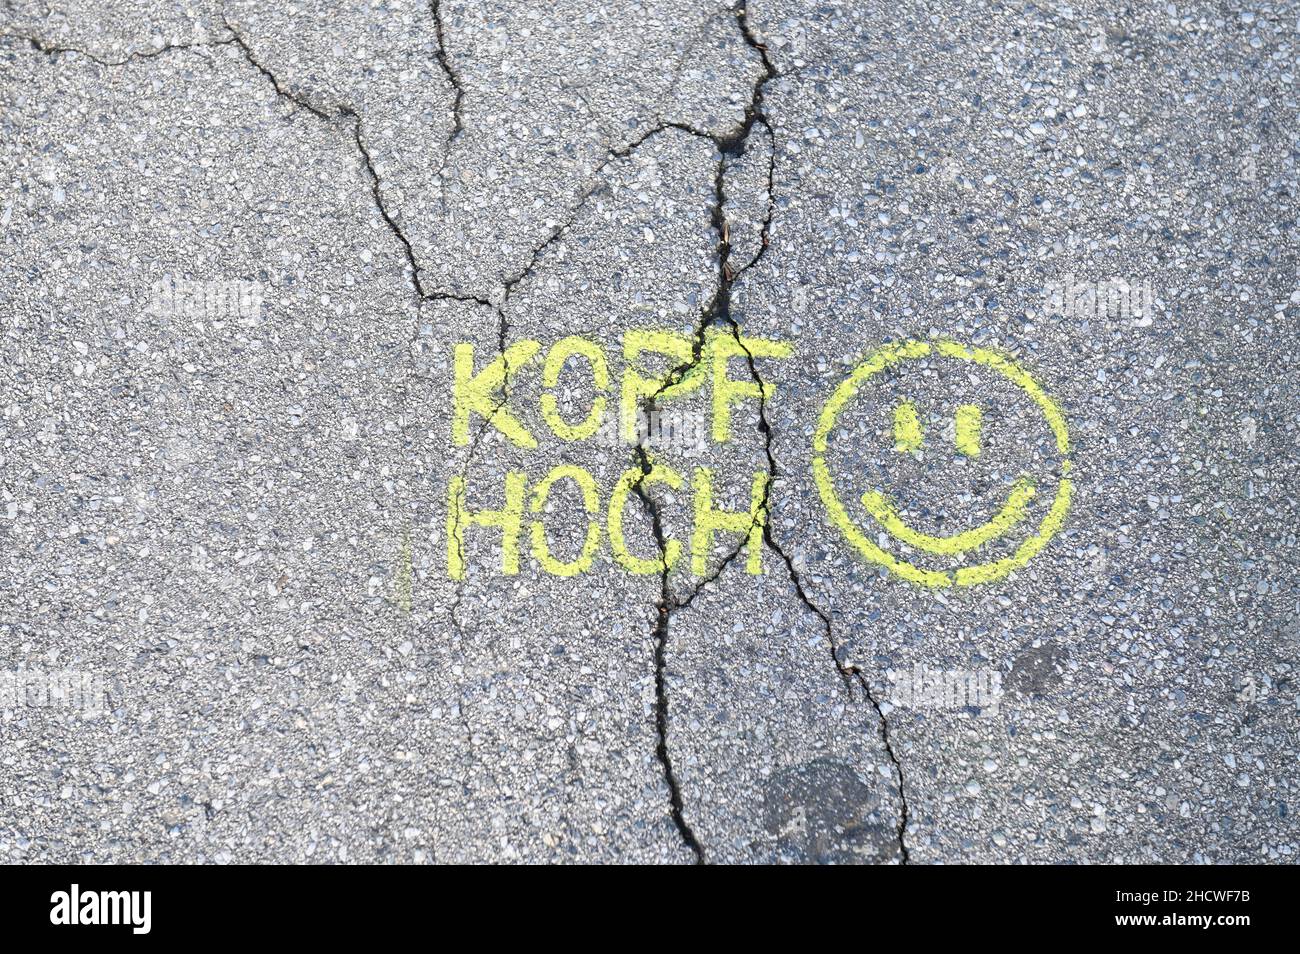 Cheer up graffiti with smiley on the asphalt Stock Photo